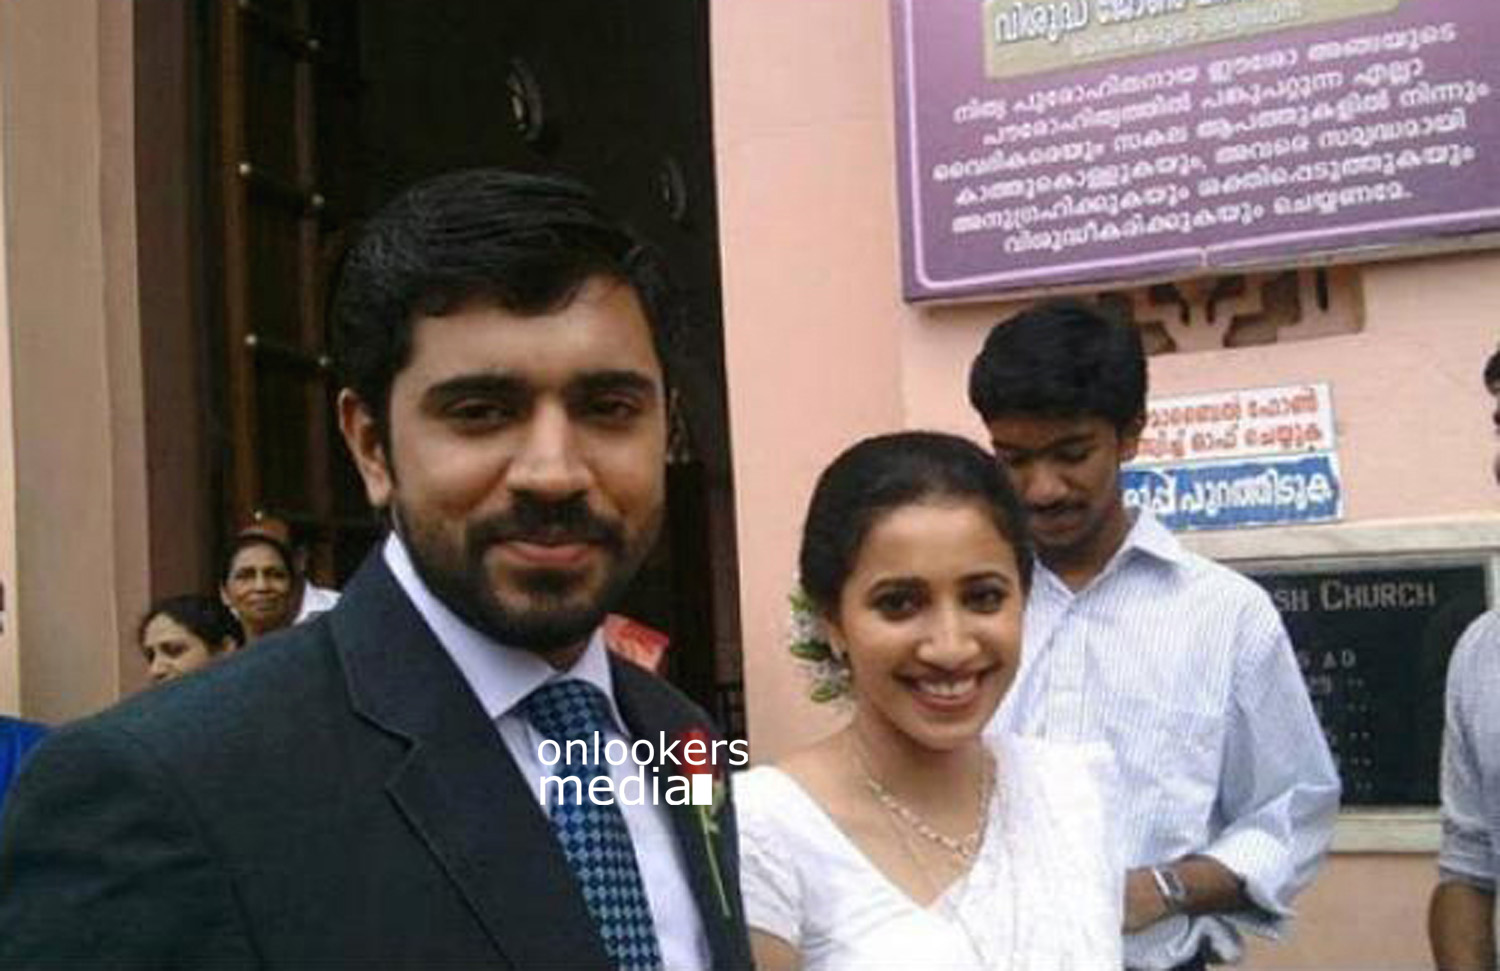 https://onlookersmedia.in/wp-content/uploads/2015/06/Nivin-Pauly-with-wife-Rinna-Joy-Nivin-Pauly-Family-Rare-Unseen-Stills-Images-Photos-Onlookers-Media-1.jpg